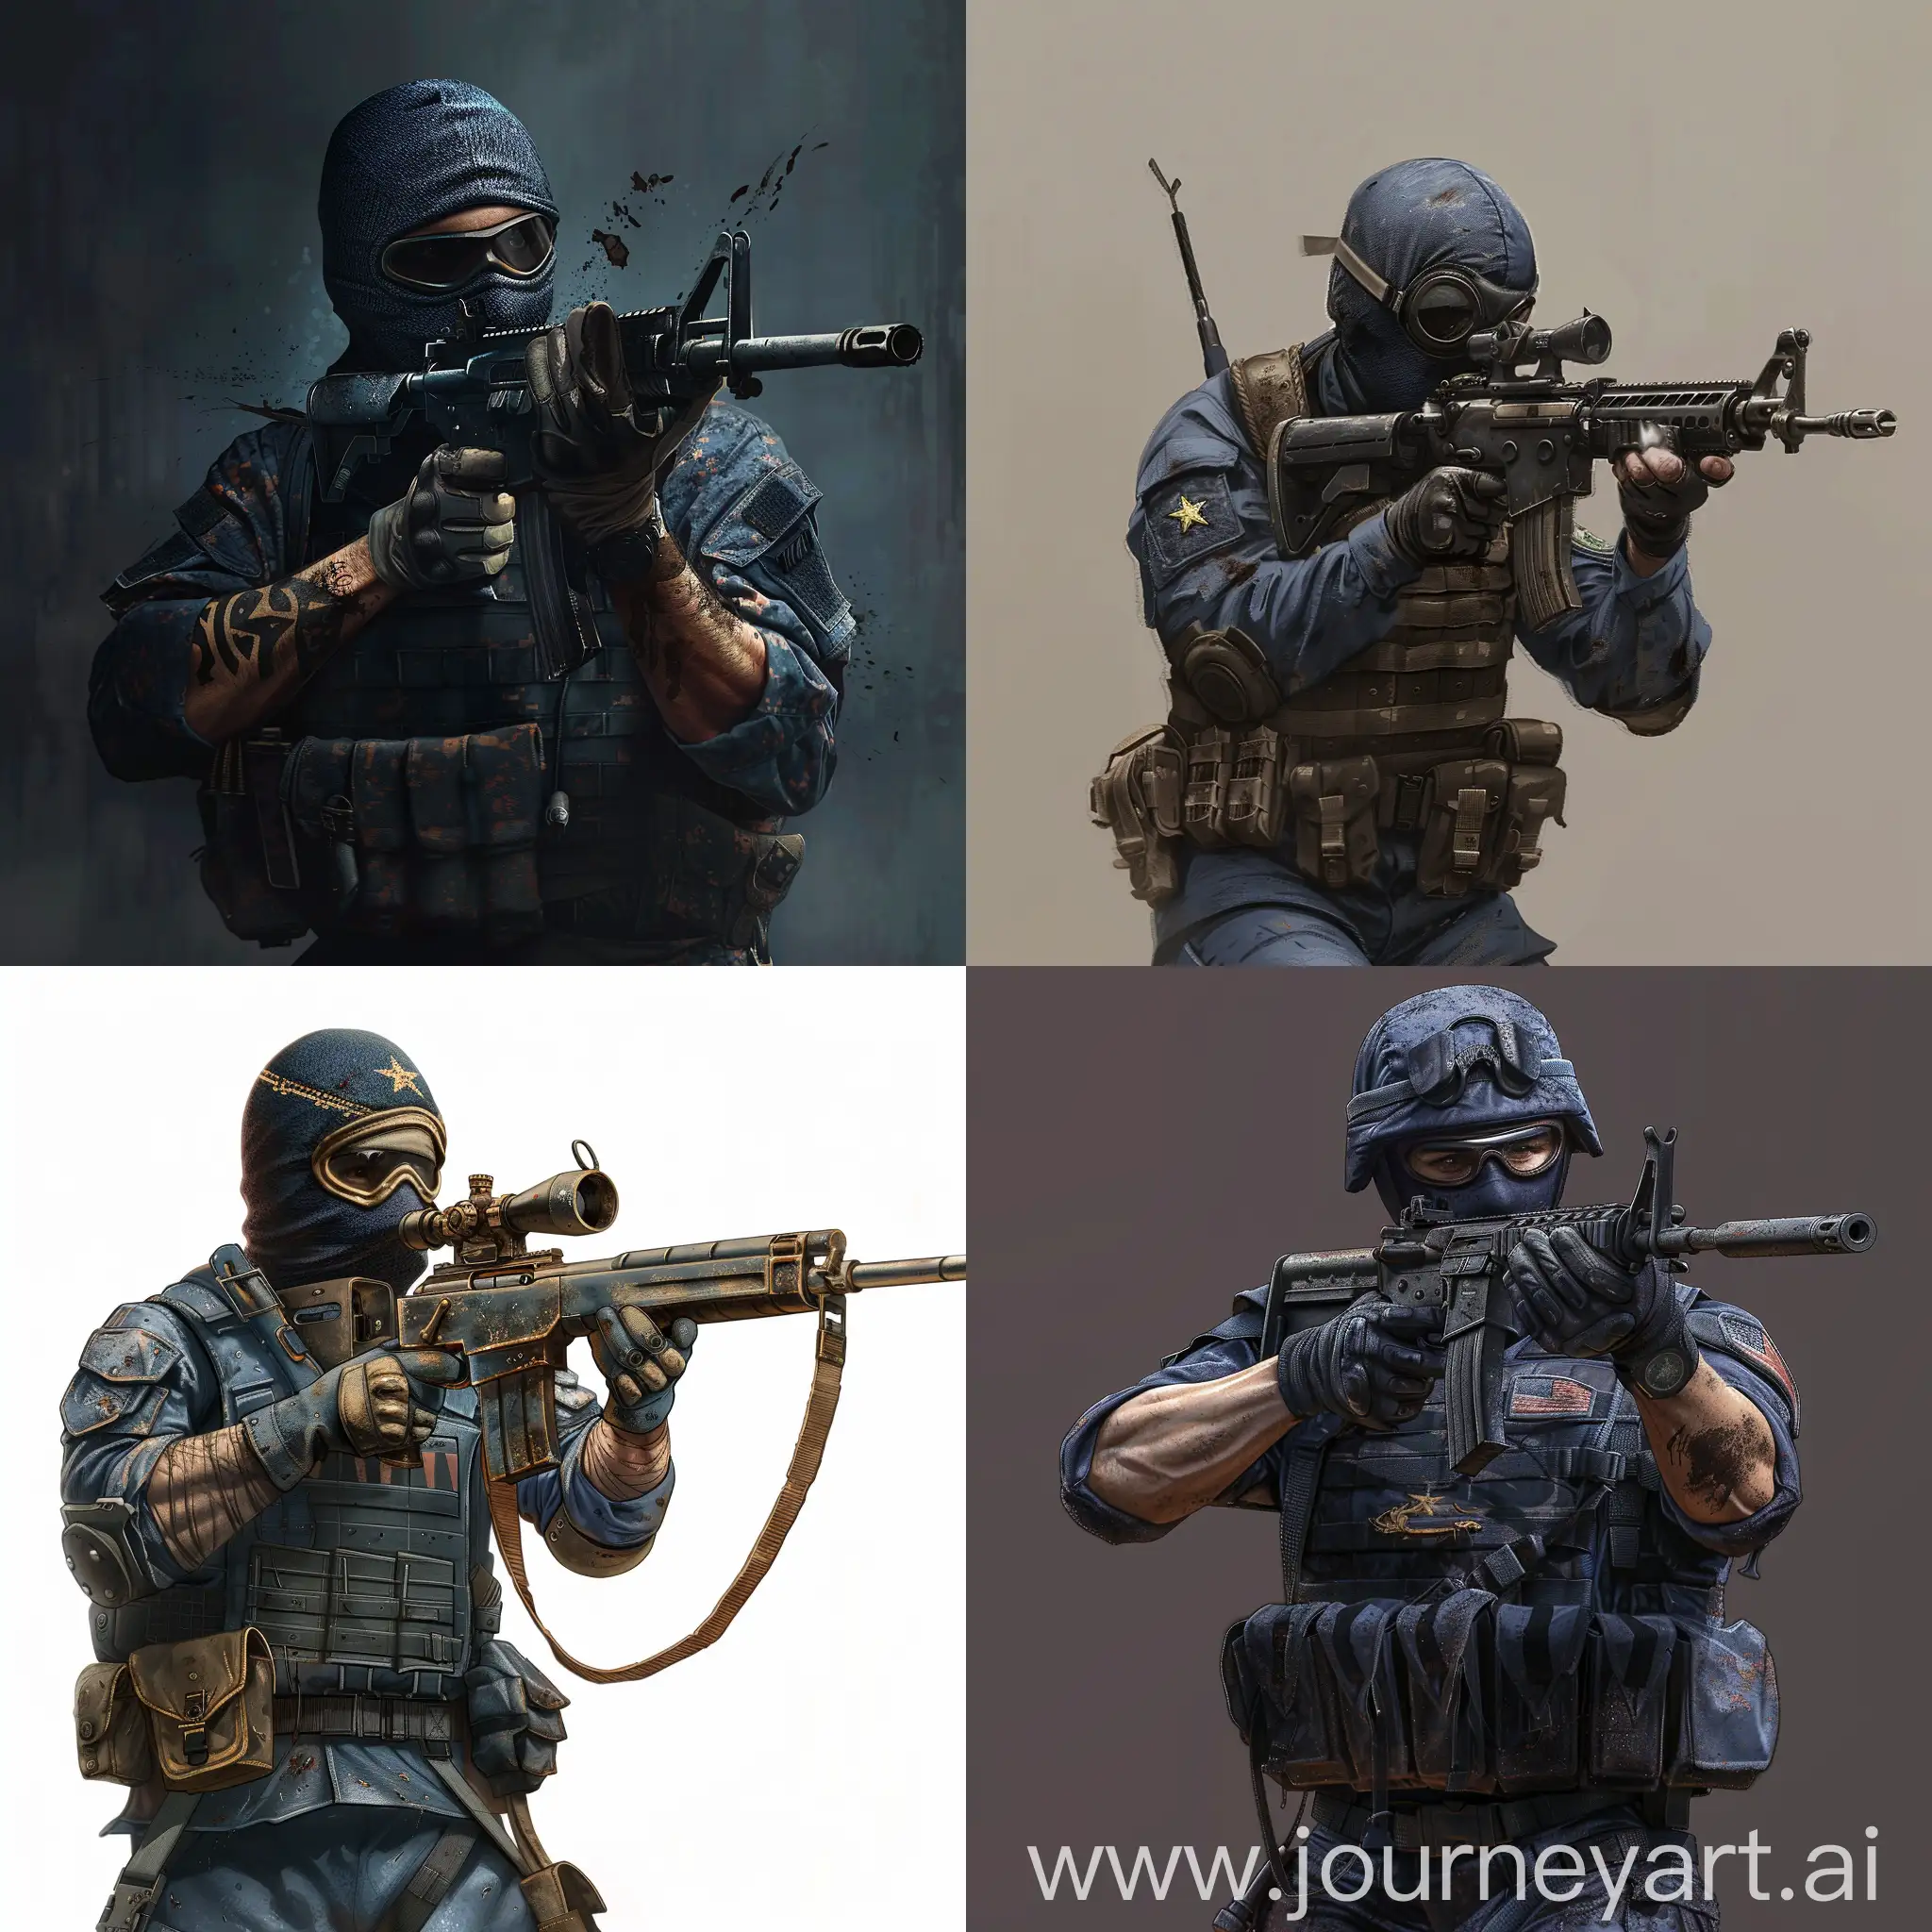 Concept art character an American soldier of the Vietnam War in a bulletproof vest of that time, with uniform of that time but black blue color, with a sniper rifle in his hands, a balaclava on his face, a gas mask on top of the balaclava of that time.